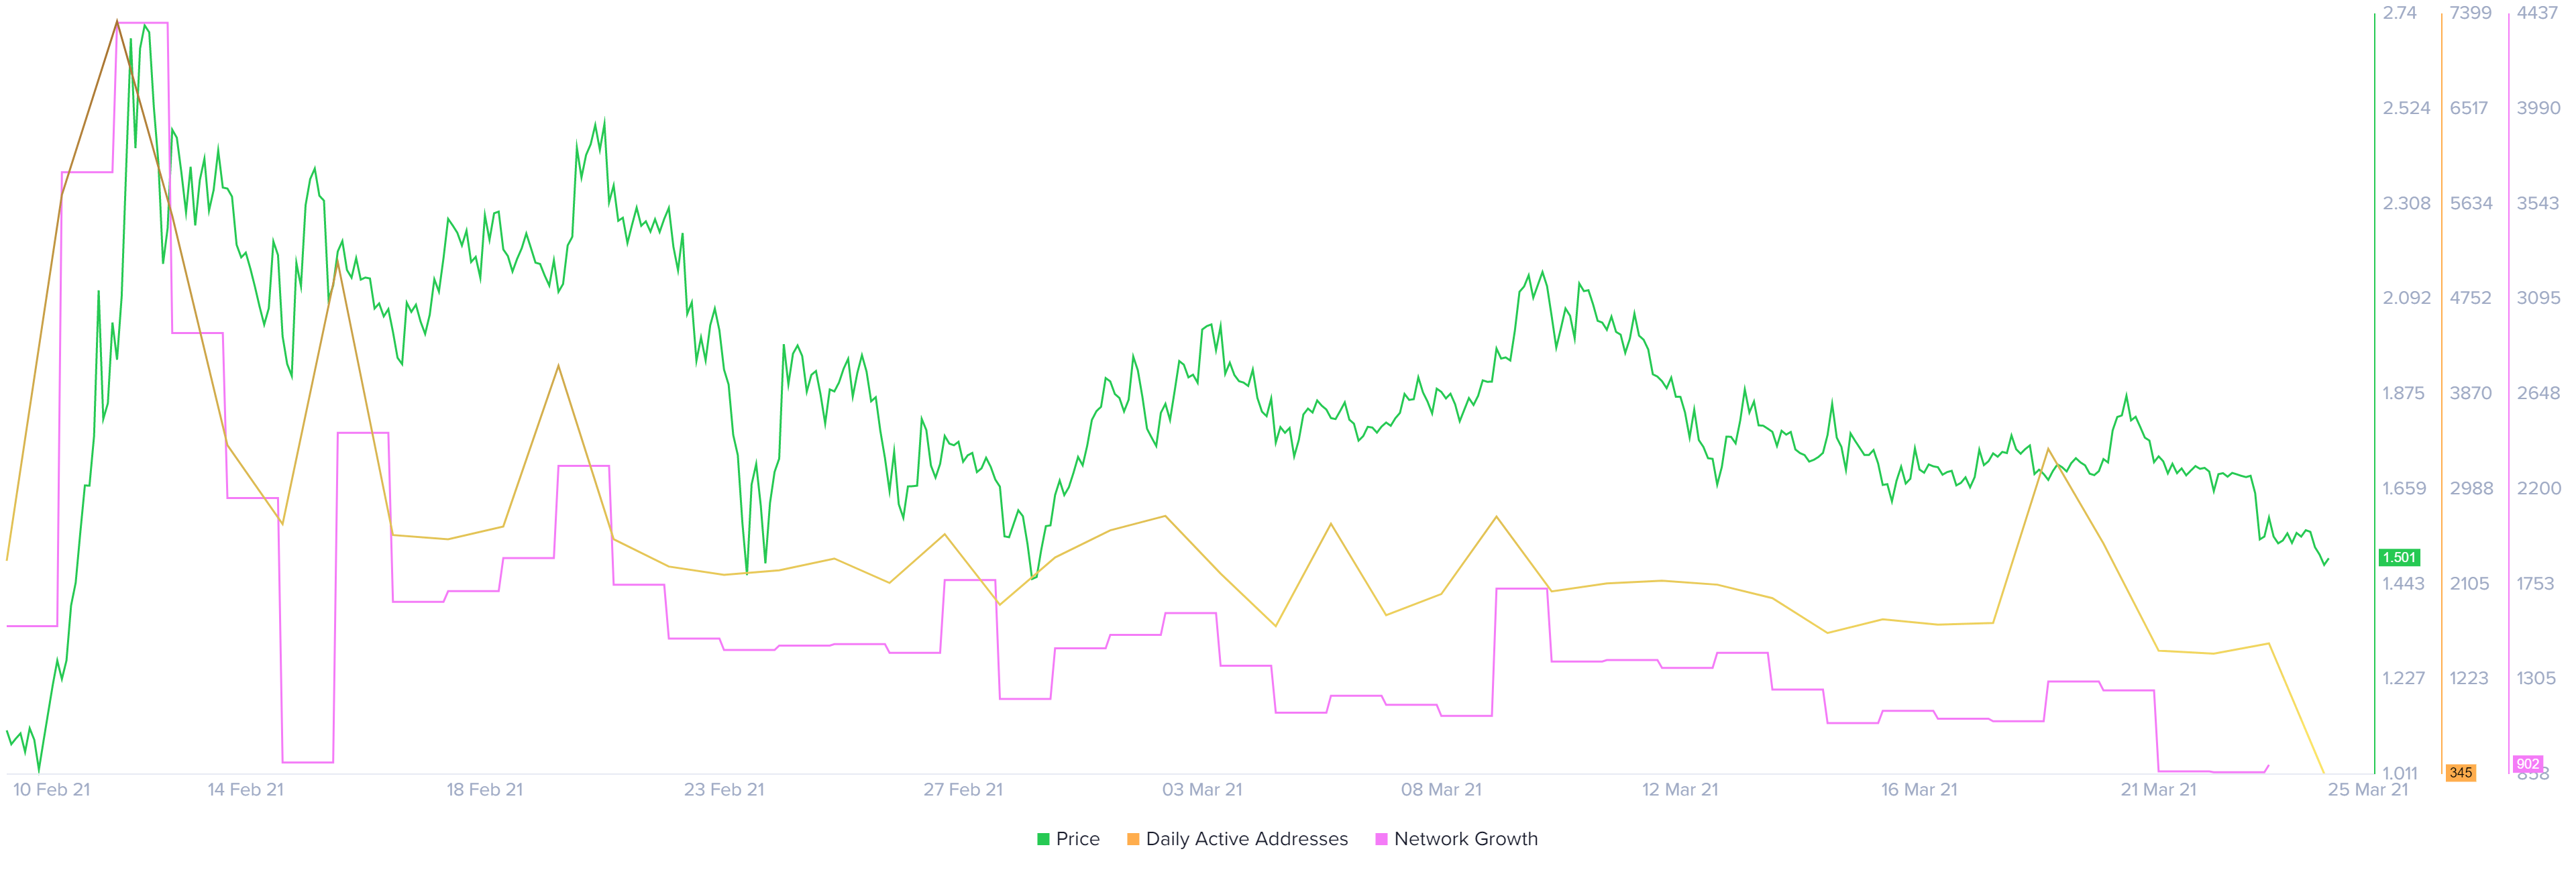 The Graph Network Growth and Daily Active addresses chart